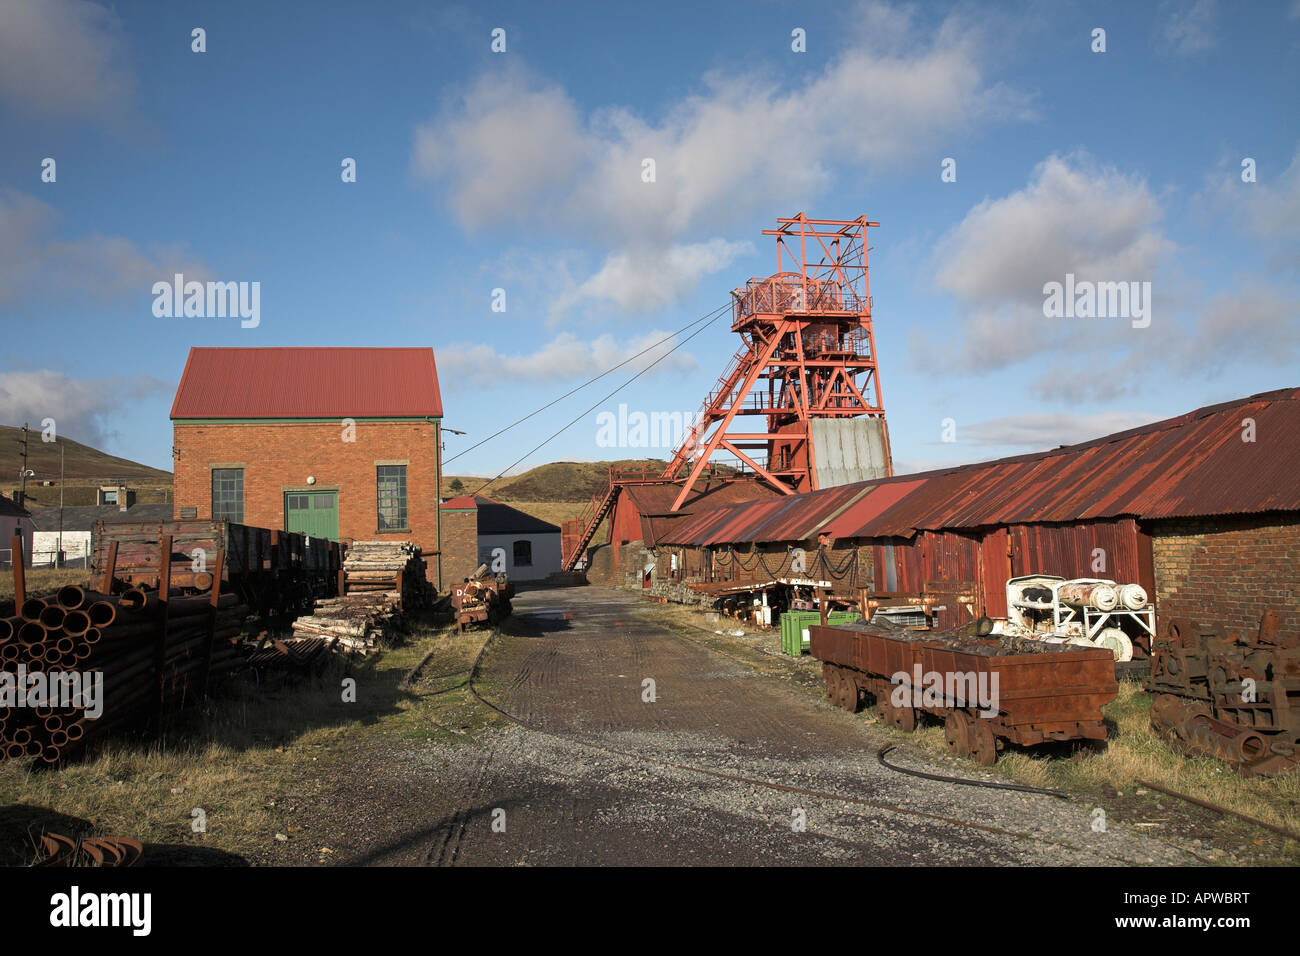 The Big Pit national coal museum situated in Blaenavon in Wales. Stock Photo